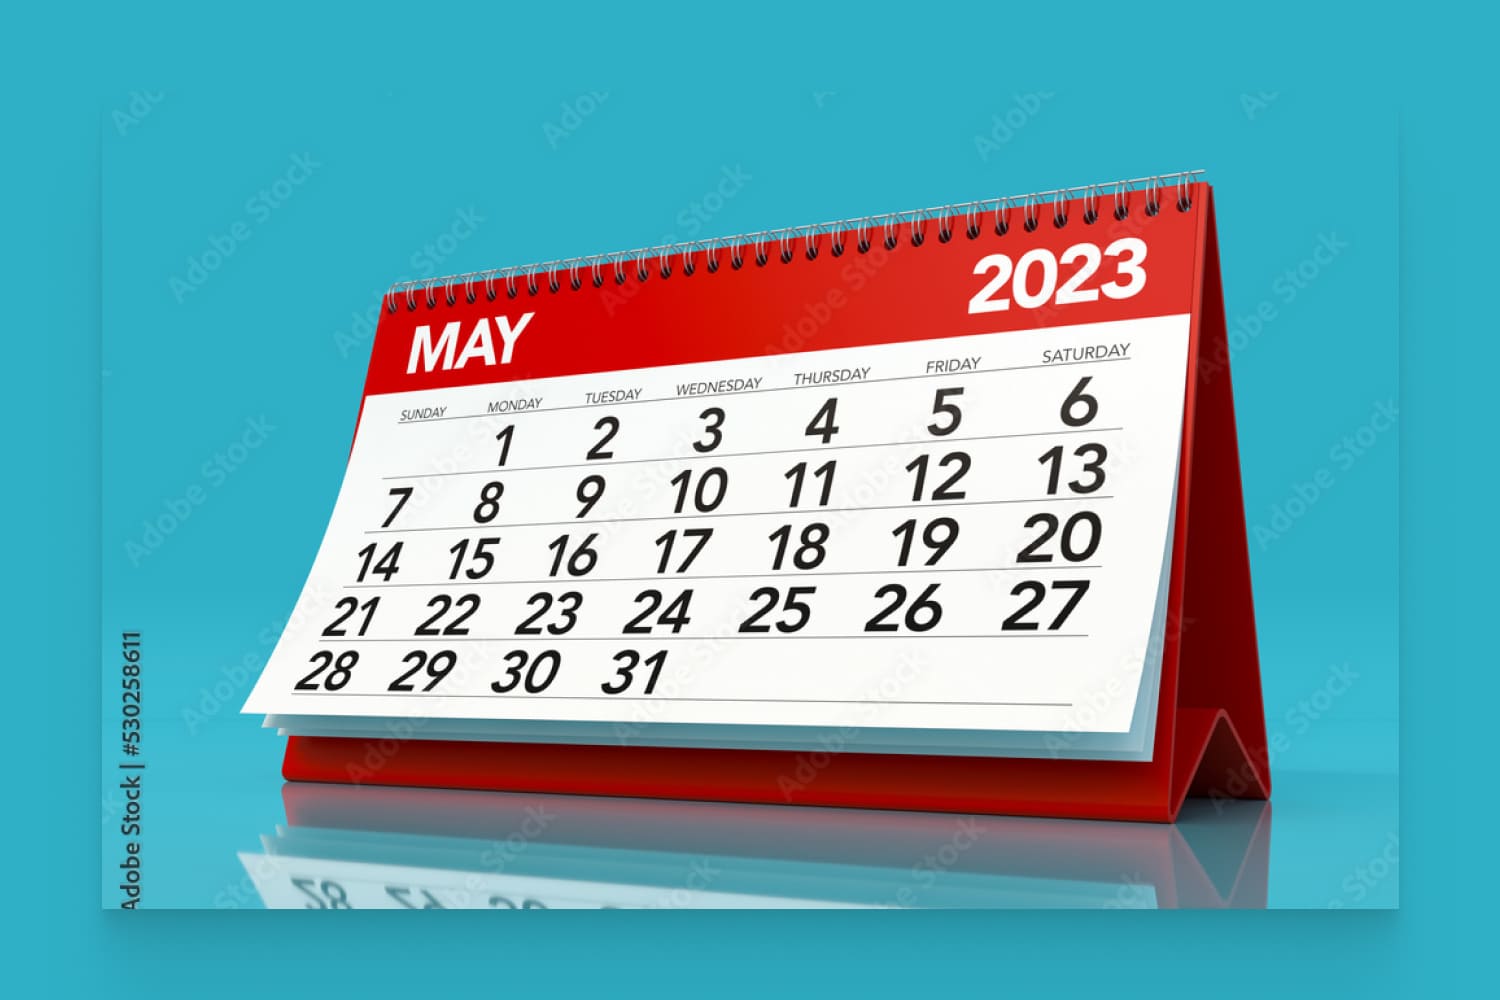 May 2023 Calendar. Isolated on Blue Background. 3D Illustration.